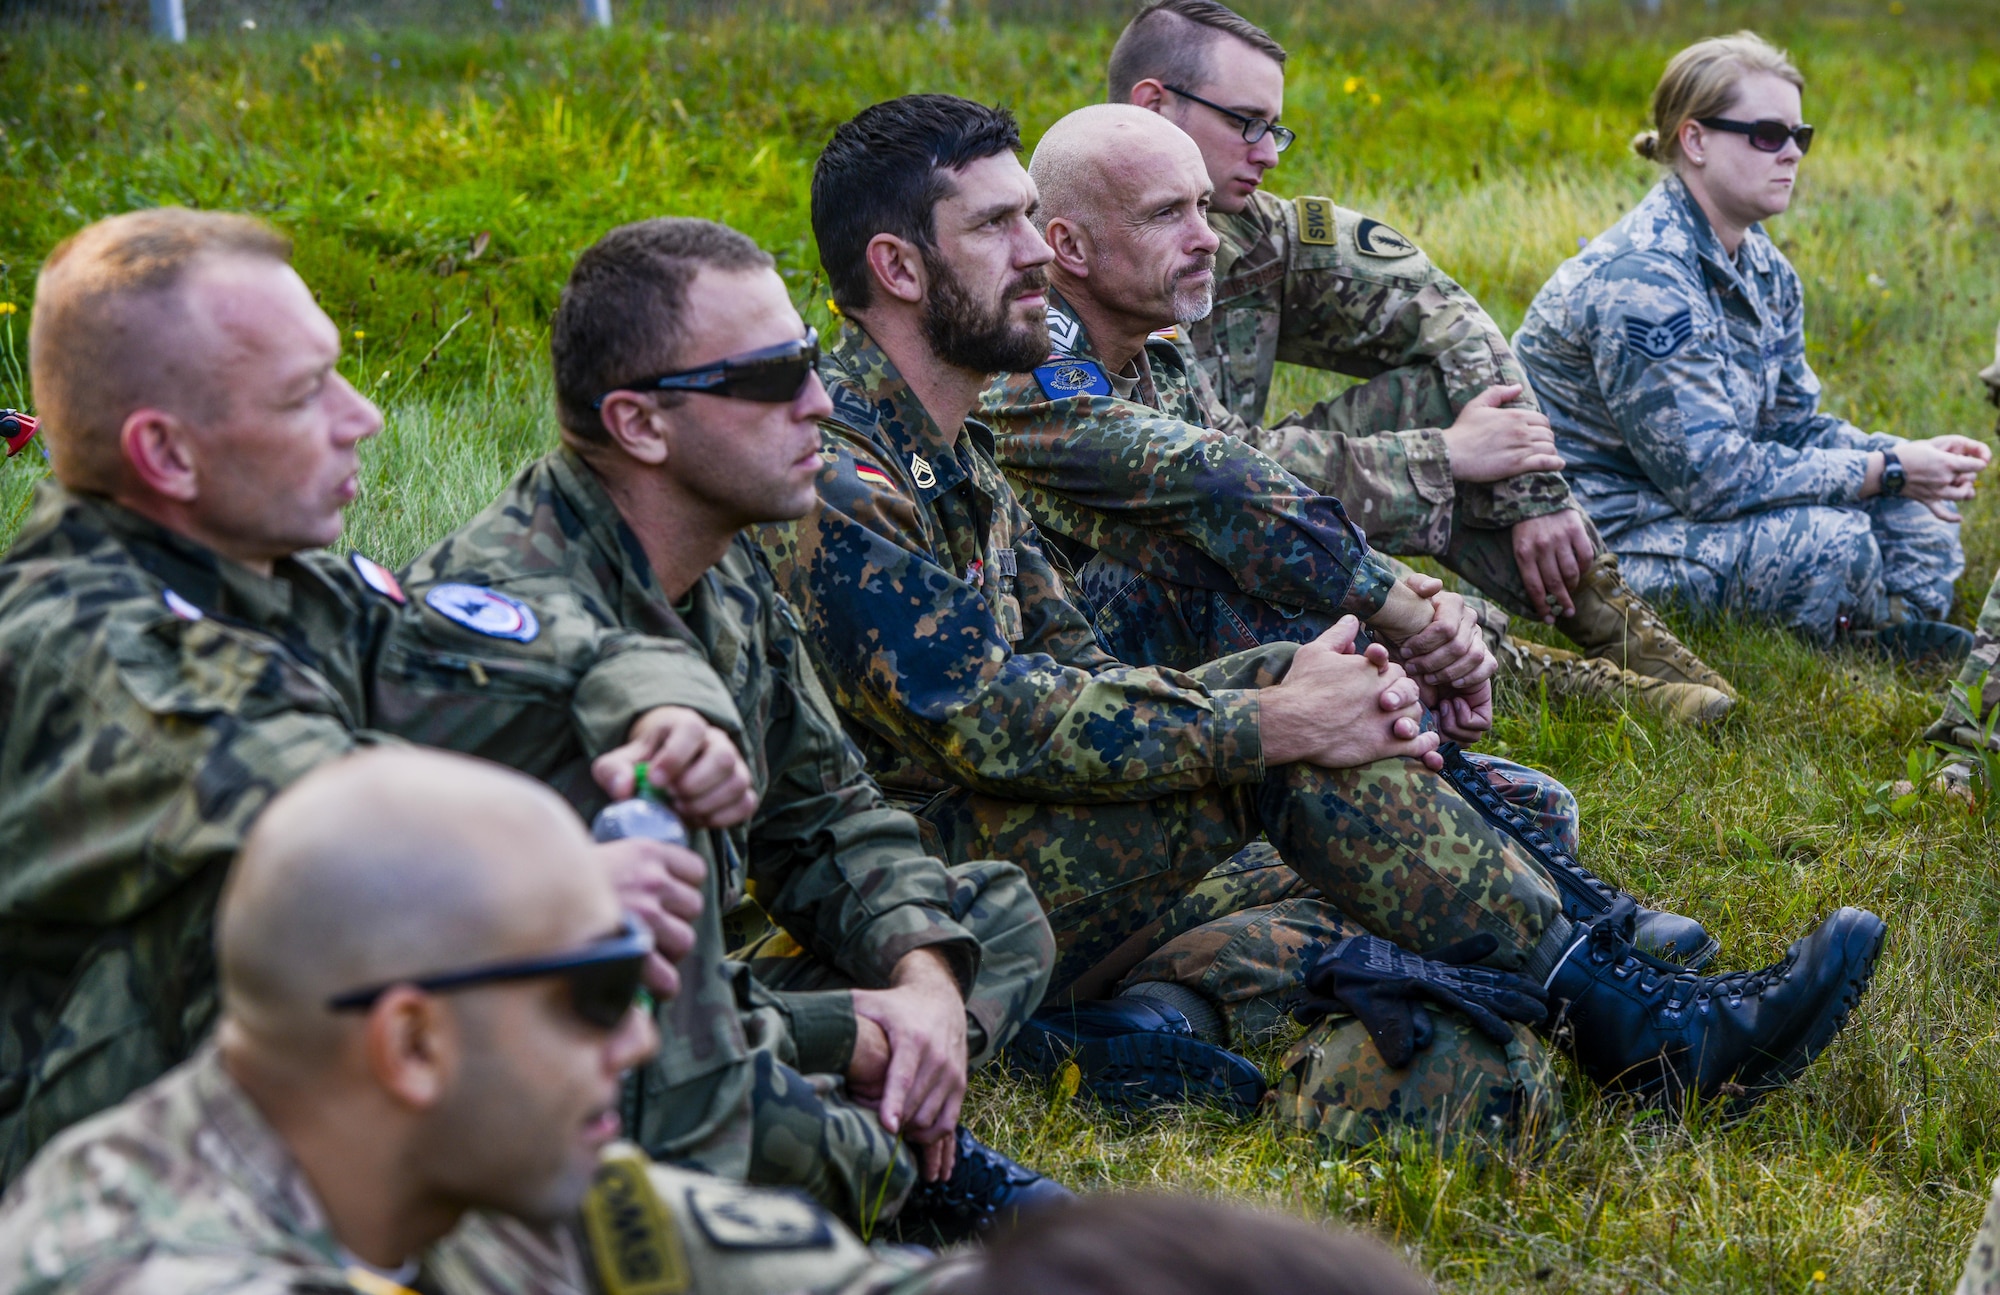 U.S., Polish and German service members wait to discuss the good and bad of the day’s training in Grafenwoehr, Germany, Sept. 27, 2016. Service members from three NATO partners came together to train on basic U.S. Army skills during exercise Cadre Focus 16.2. Cadre Focus is a biannual training event for Airmen from the 7th Weather Squadron and 7th Expeditionary Weather Squadron. Cadre Focus 16.2 marked the first time the weather Airmen invited their NATO partners to the training event. (U.S. Air Force photo by Staff Sgt. Timothy Moore)